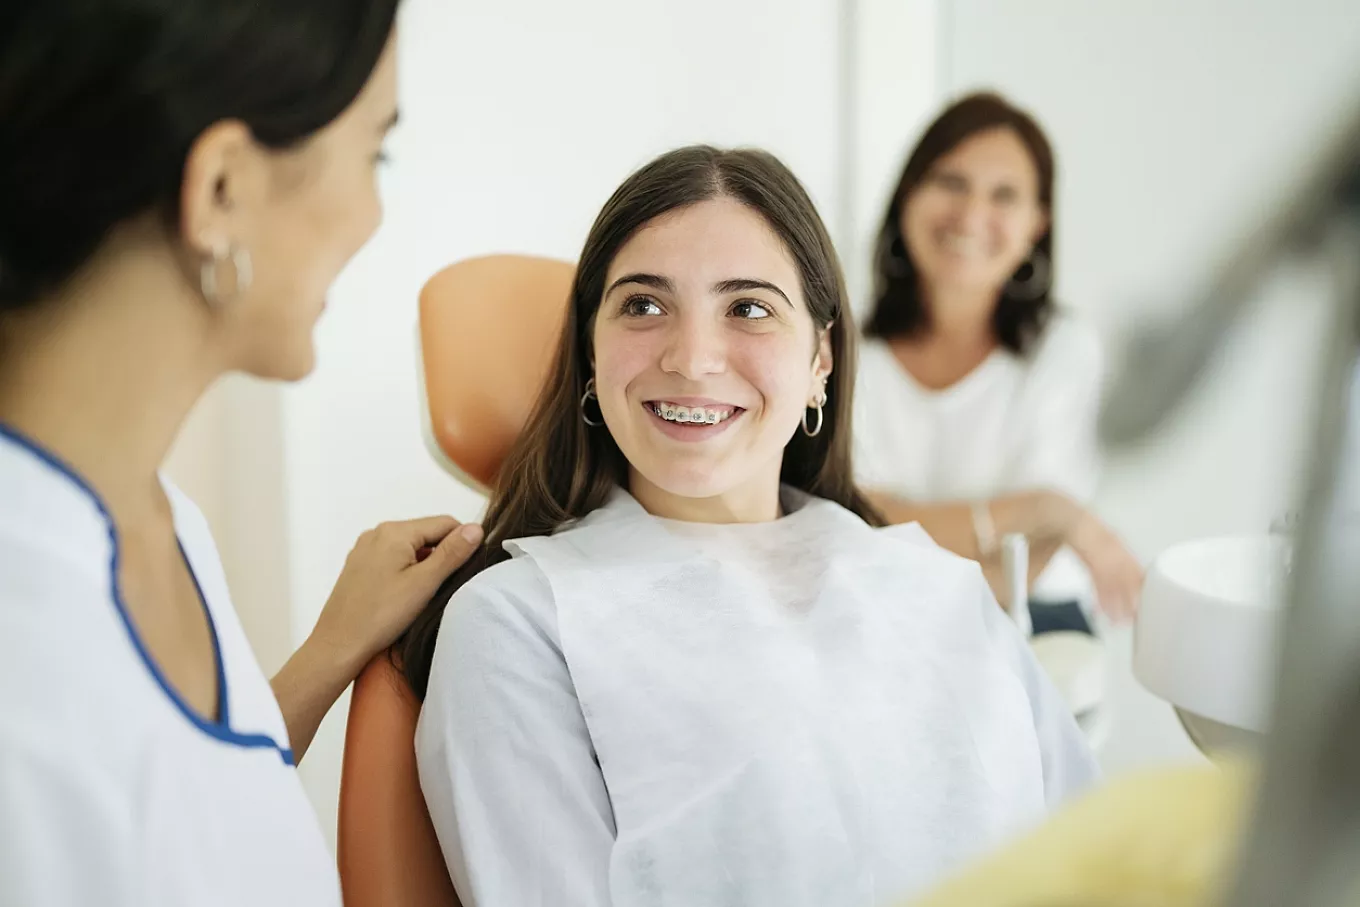 Invisalign® Clear Aligners vs. Braces for Teens